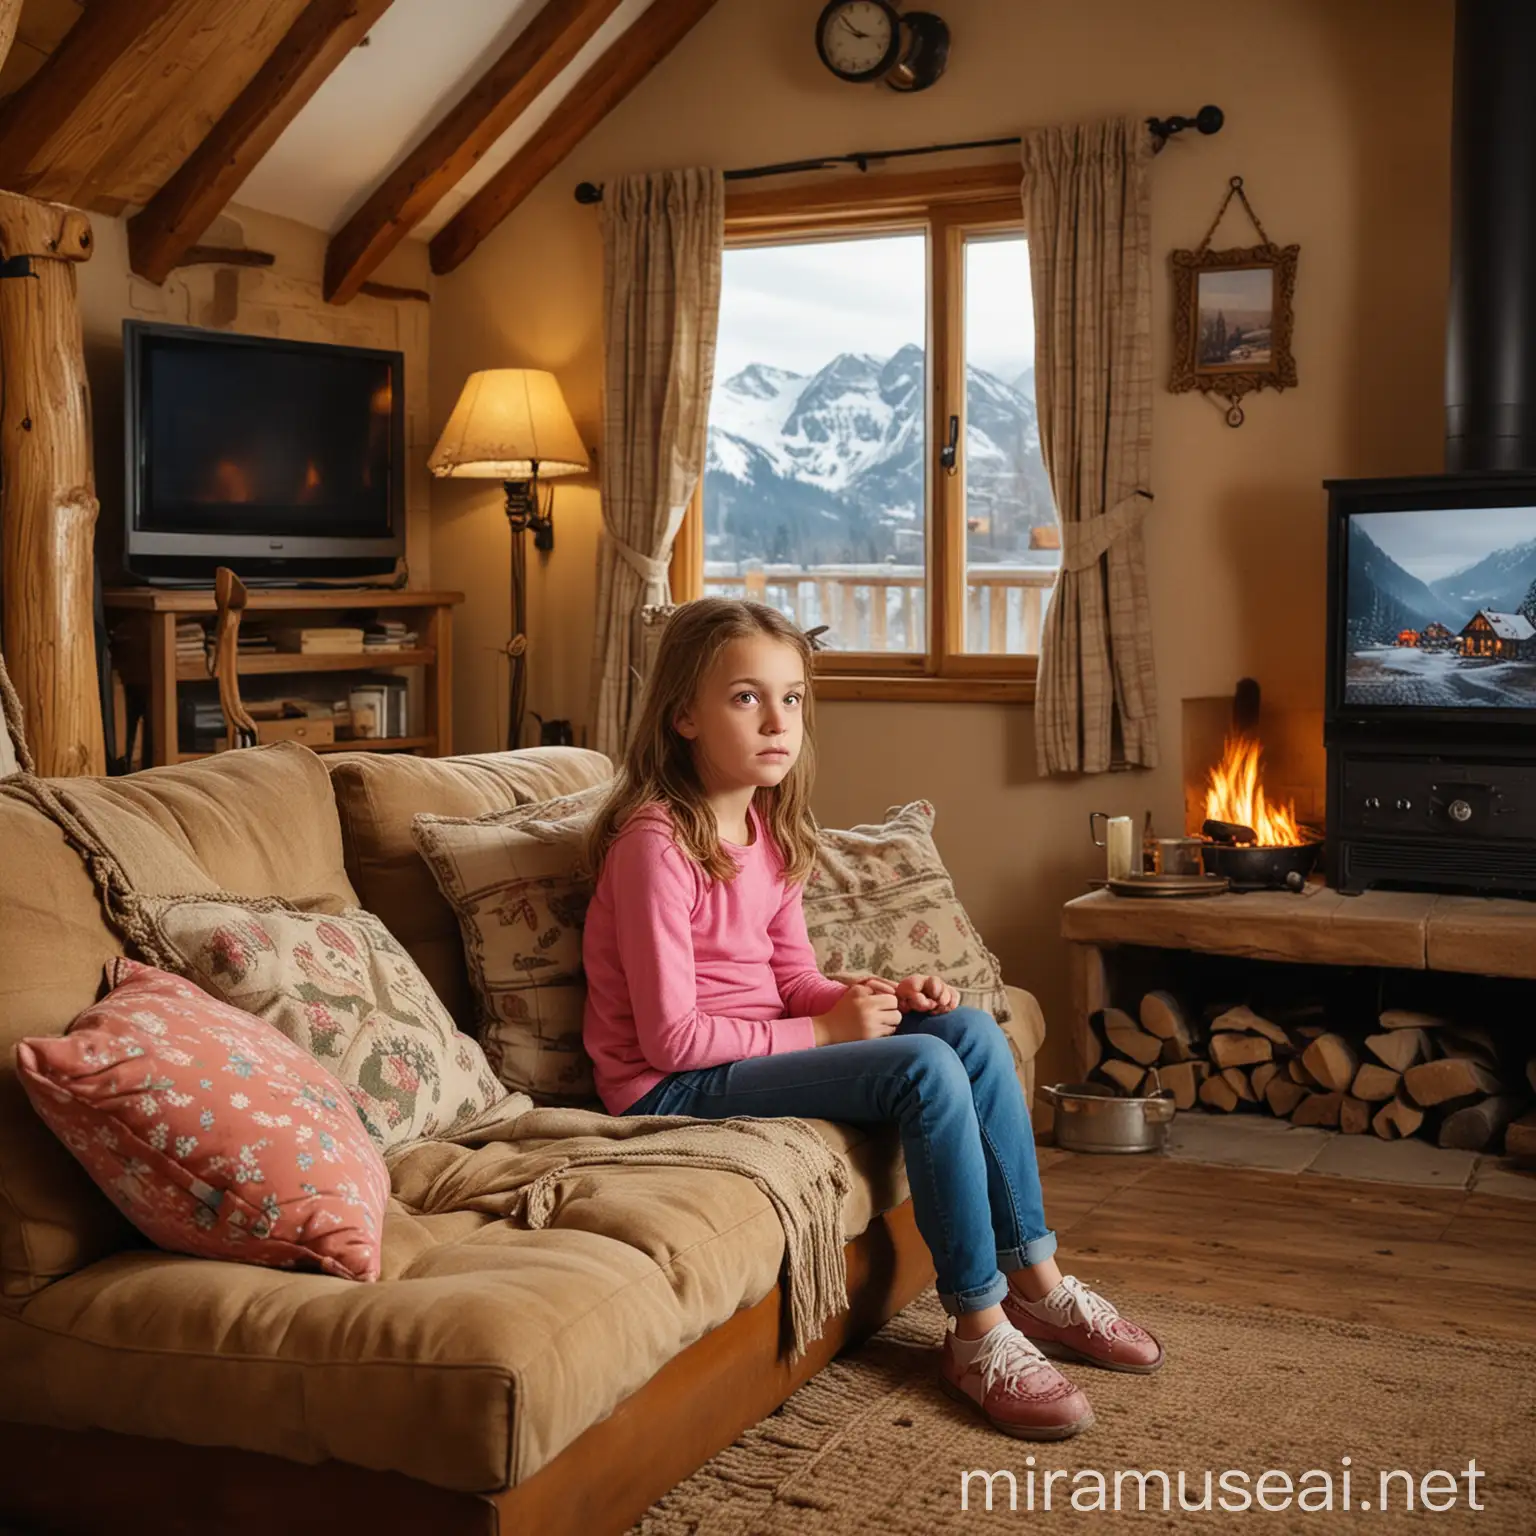 Cozy 10YearOld Girl Relaxing on Cottage Sofa Surrounded by Mountain Charm